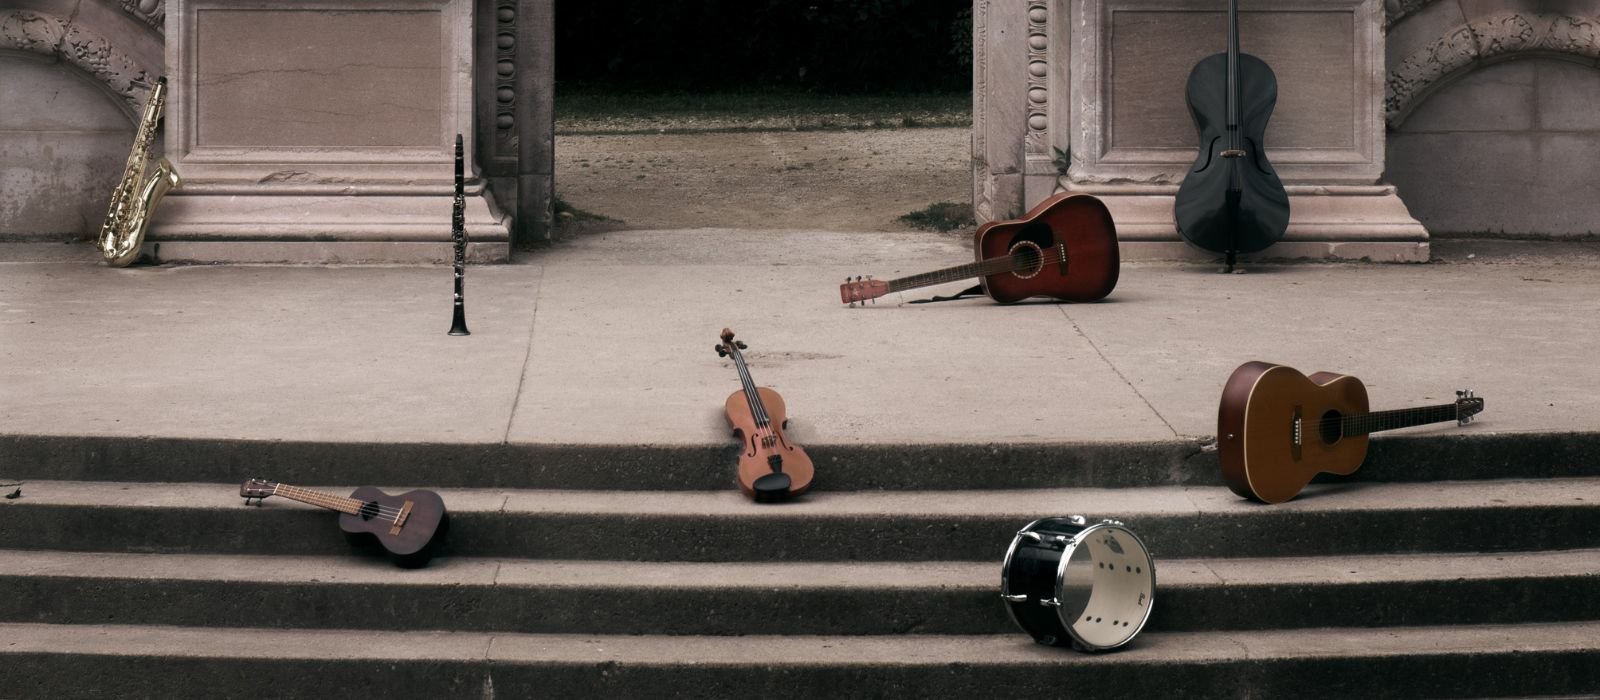 Musical instruments lay on stone steps, with an archway and columns in the background.